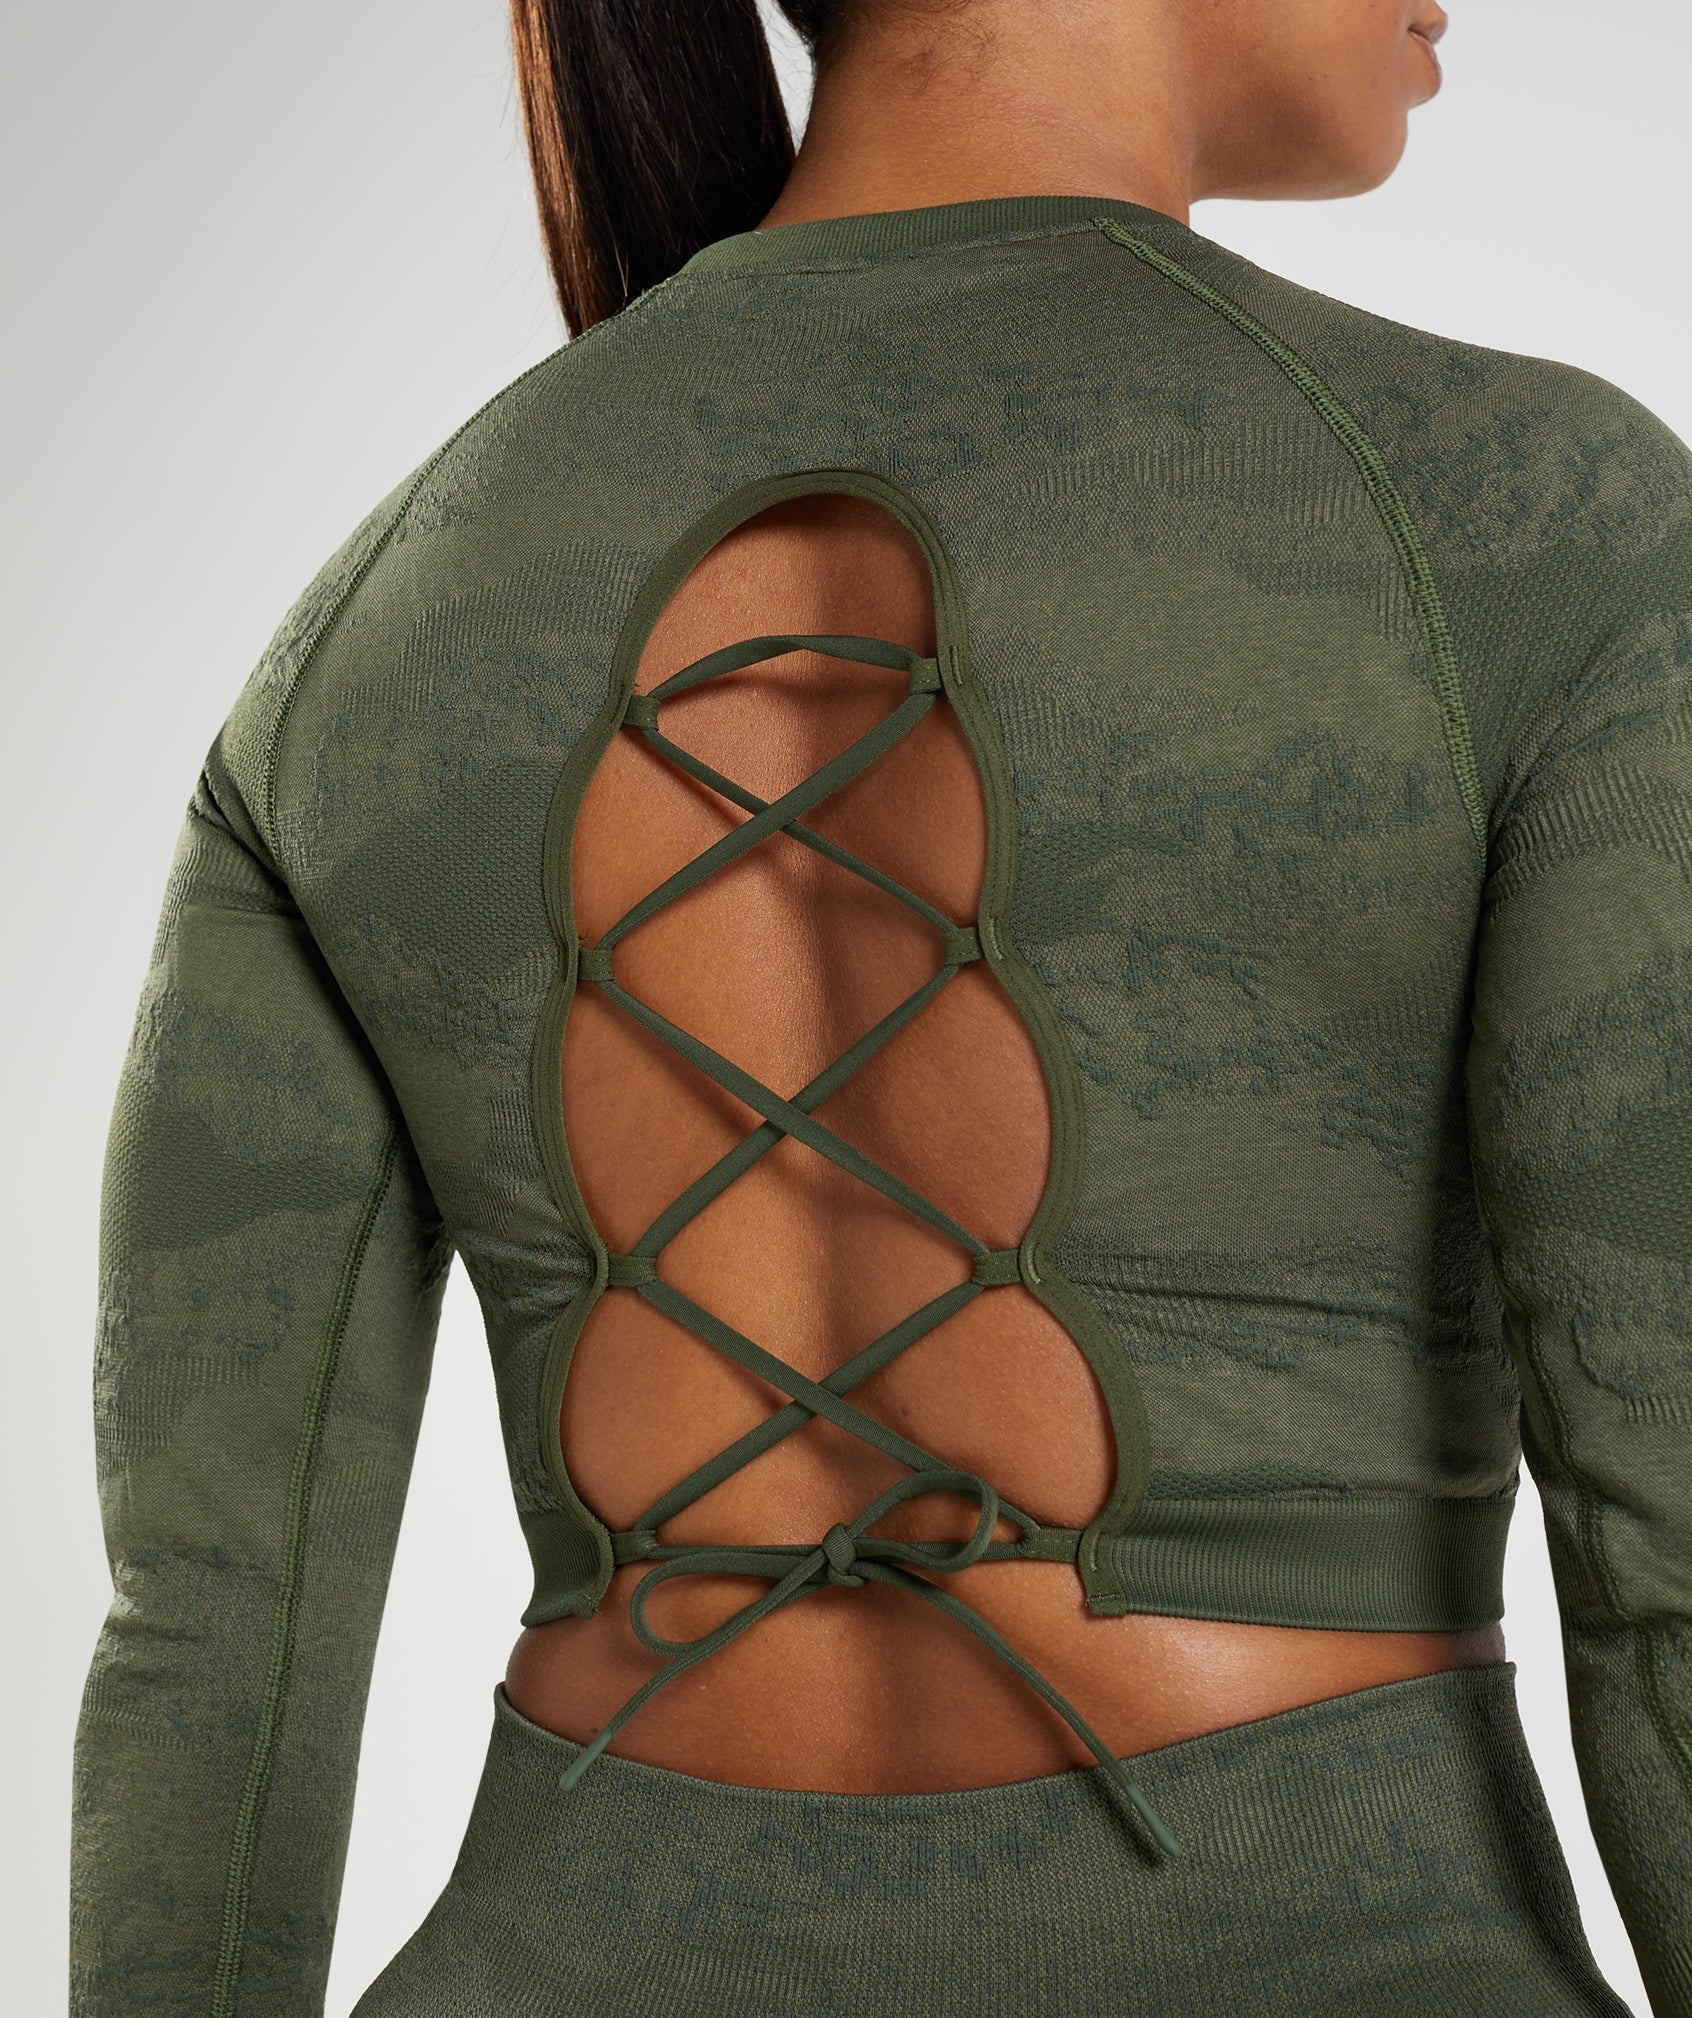 Adapt Camo Seamless Lace Up Back Top in Moss Olive/Core Olive - view 5